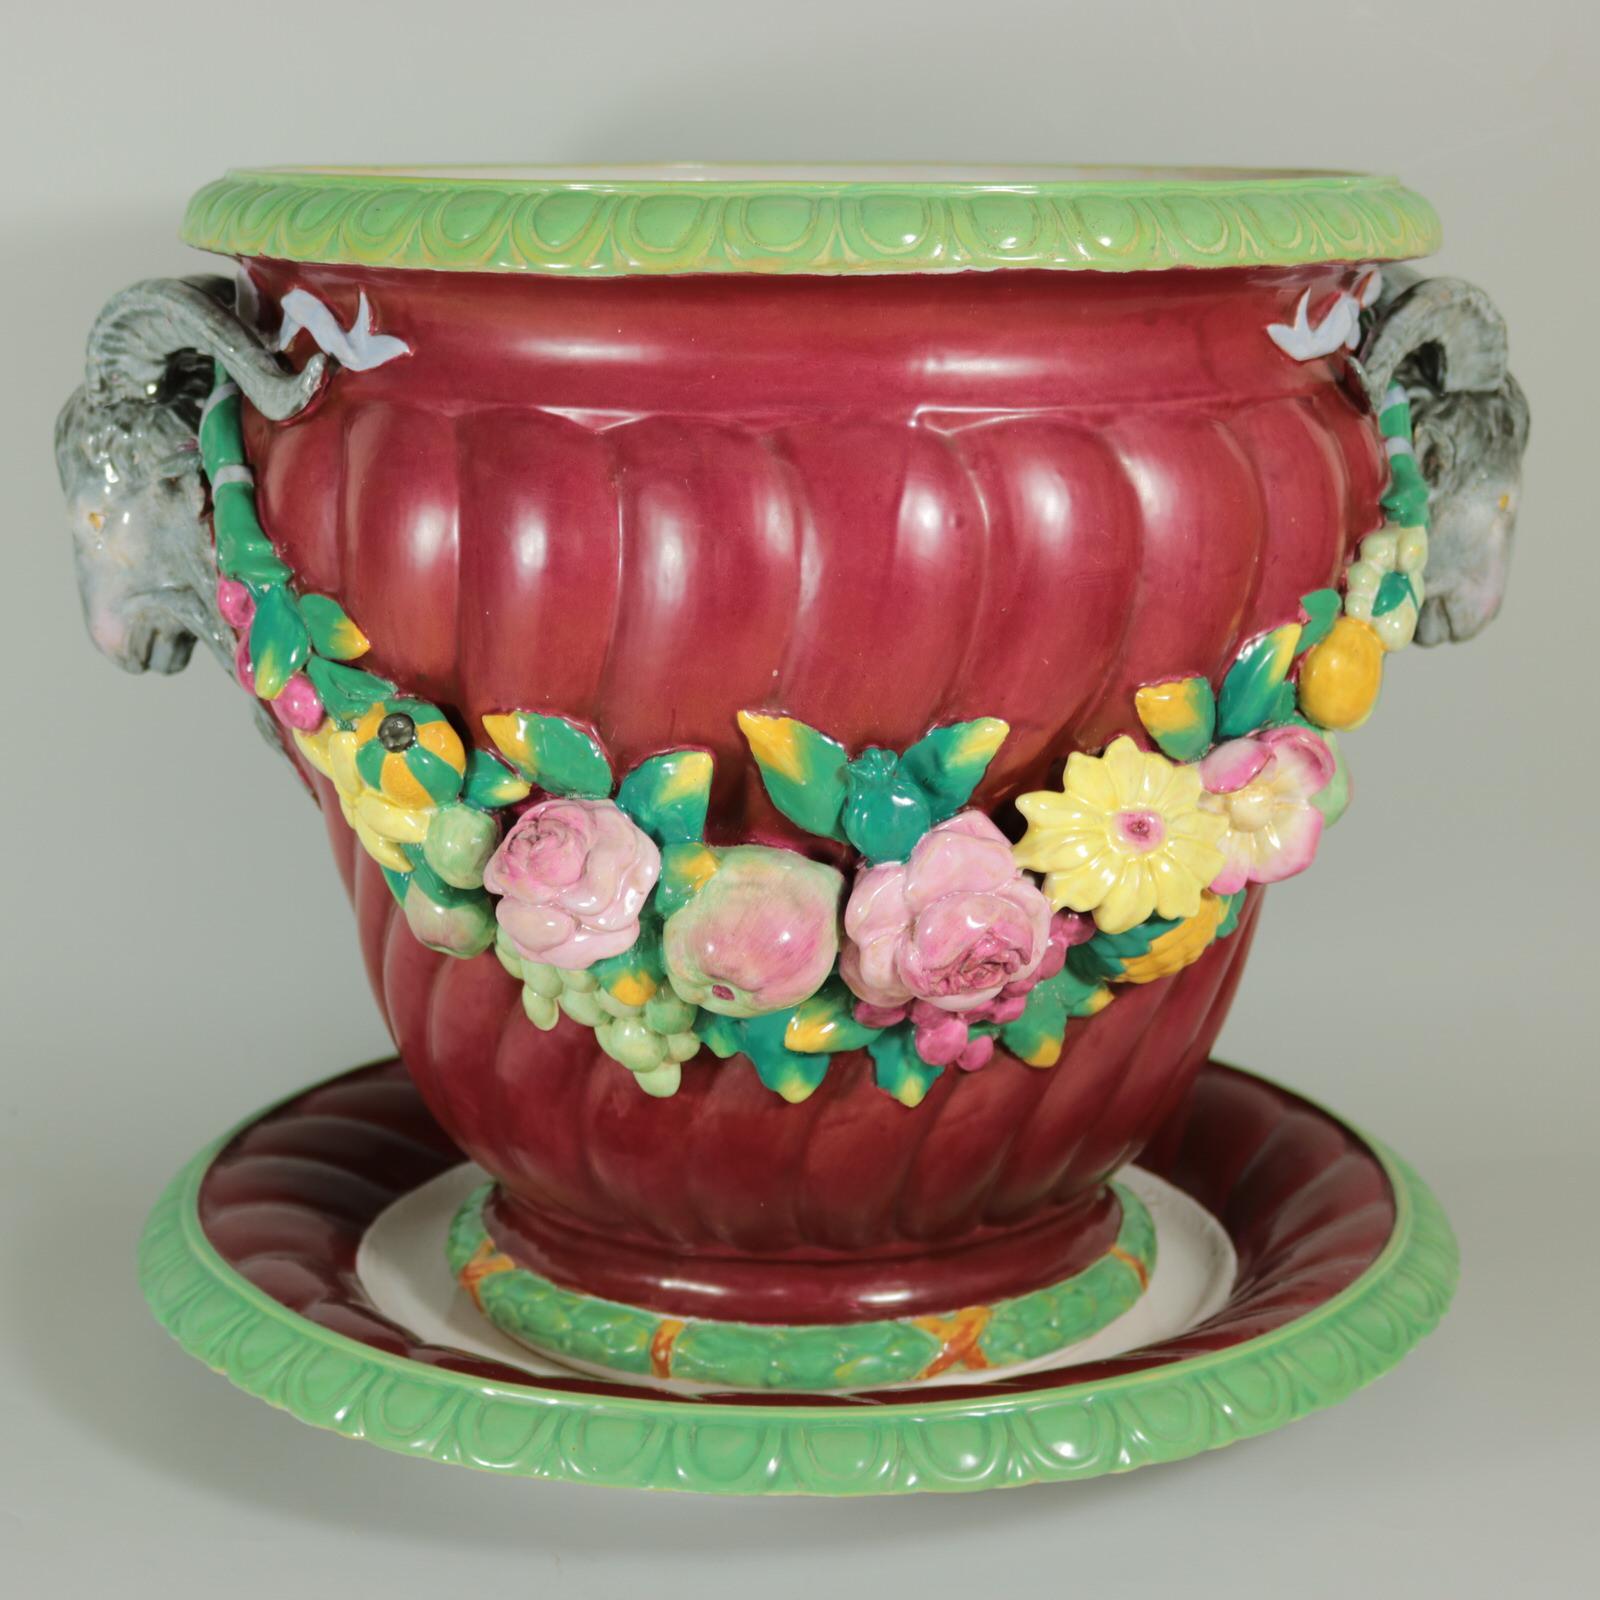 Pair of Minton Majolica jardinière and stands which feature ram's head handles and fruit swags. Rare, Magenta ground version. Colouration: magenta, green, pink, are predominant. Minton date cipher for the year 1853, impressed to the underside of one